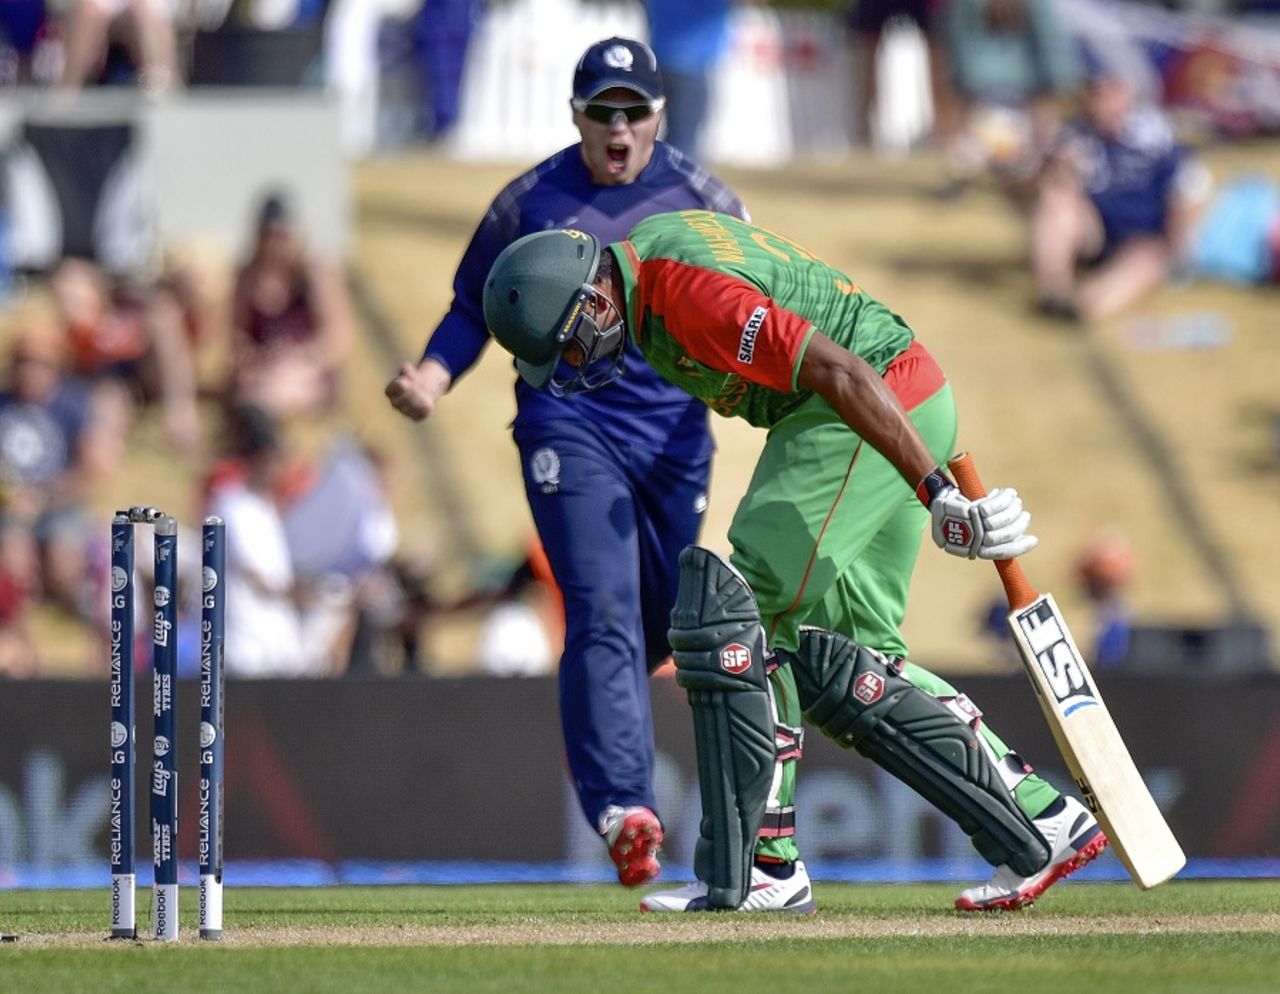 Mahmudullah was bowled after deflecting the ball off the boot, Bangladesh v Scotland, World Cup 2015, Group A, Nelson, March 5, 2015